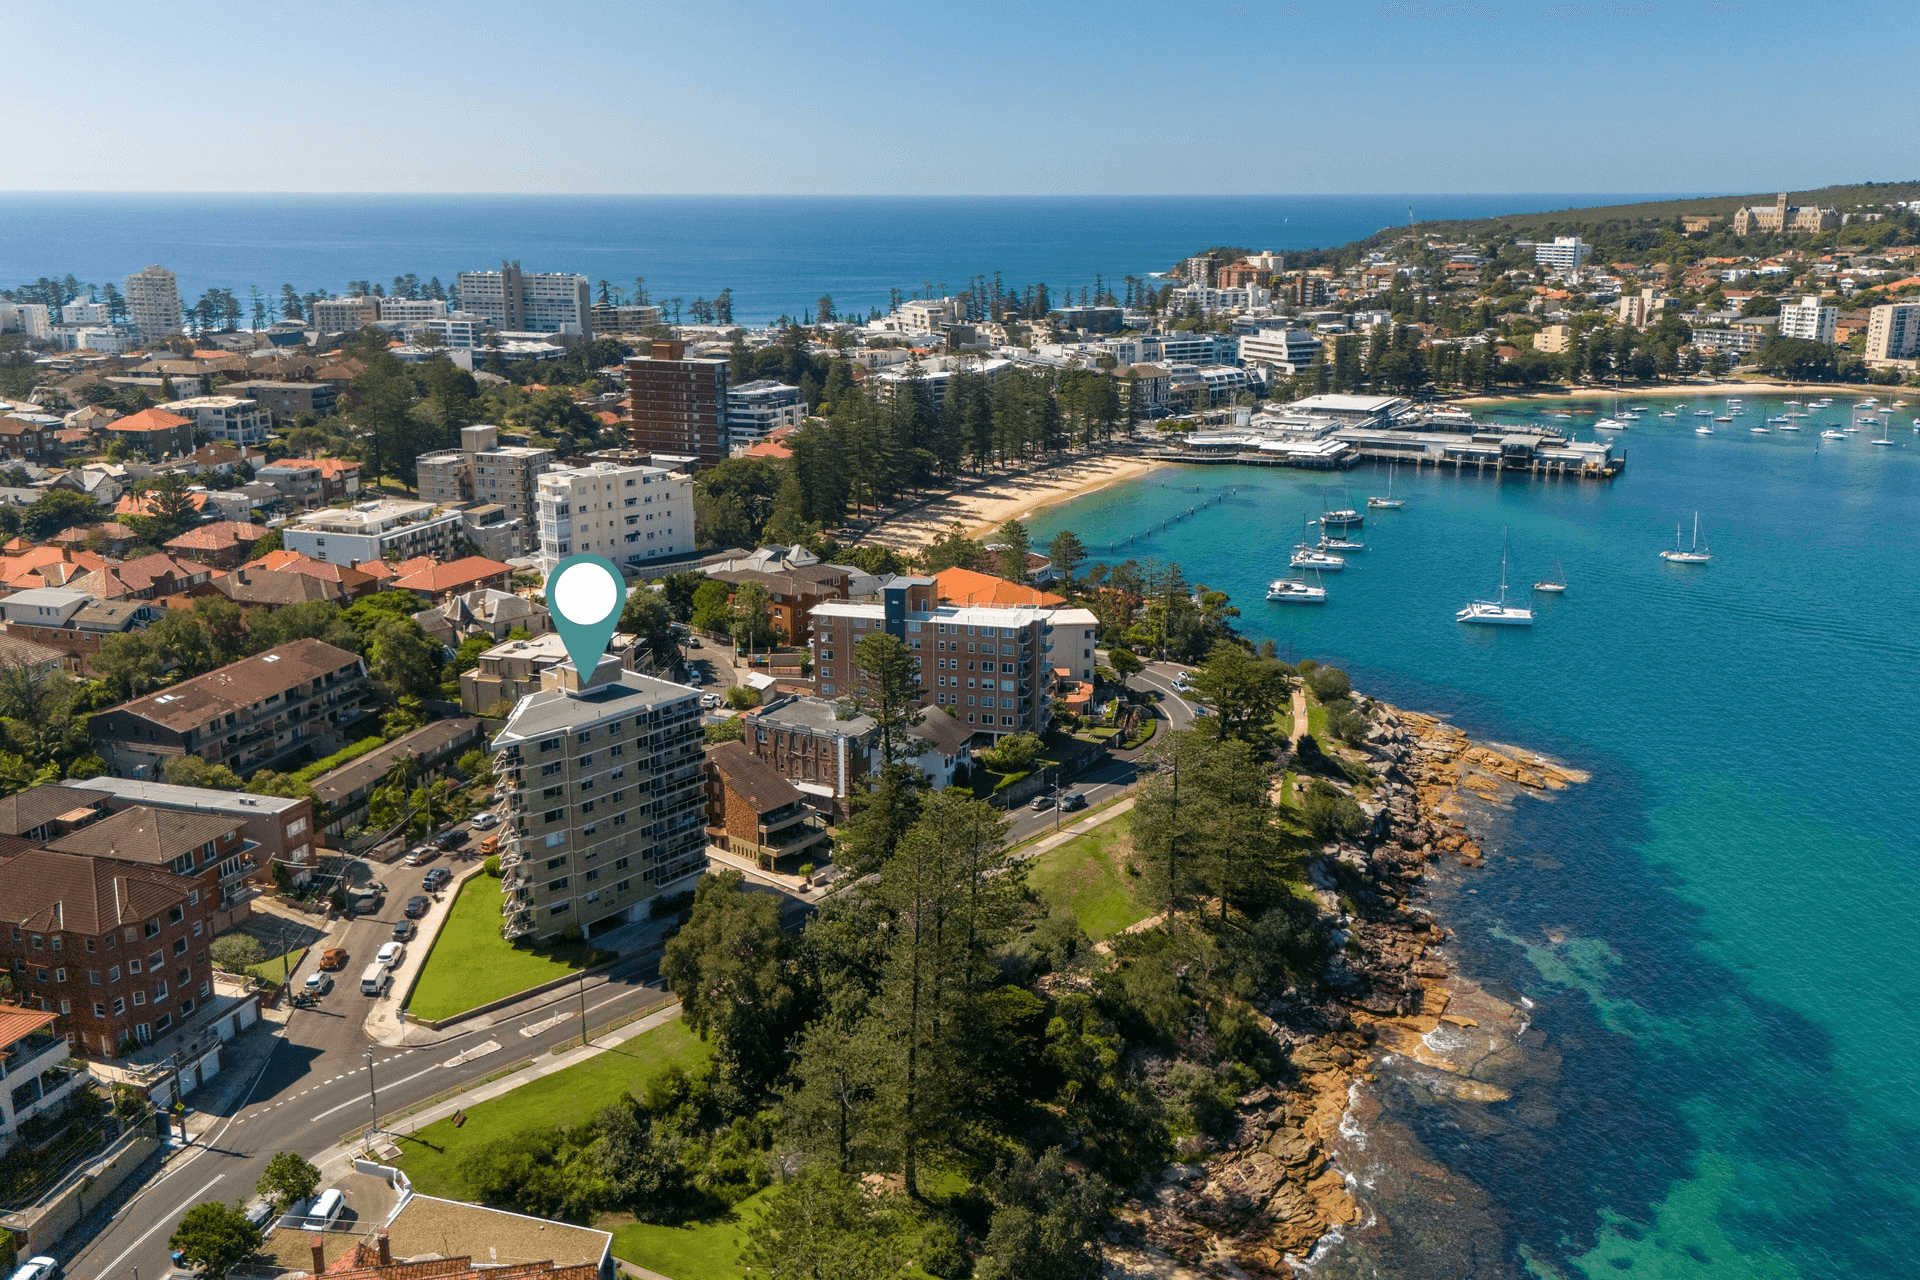 12/37 The Crescent, Manly, NSW 2095